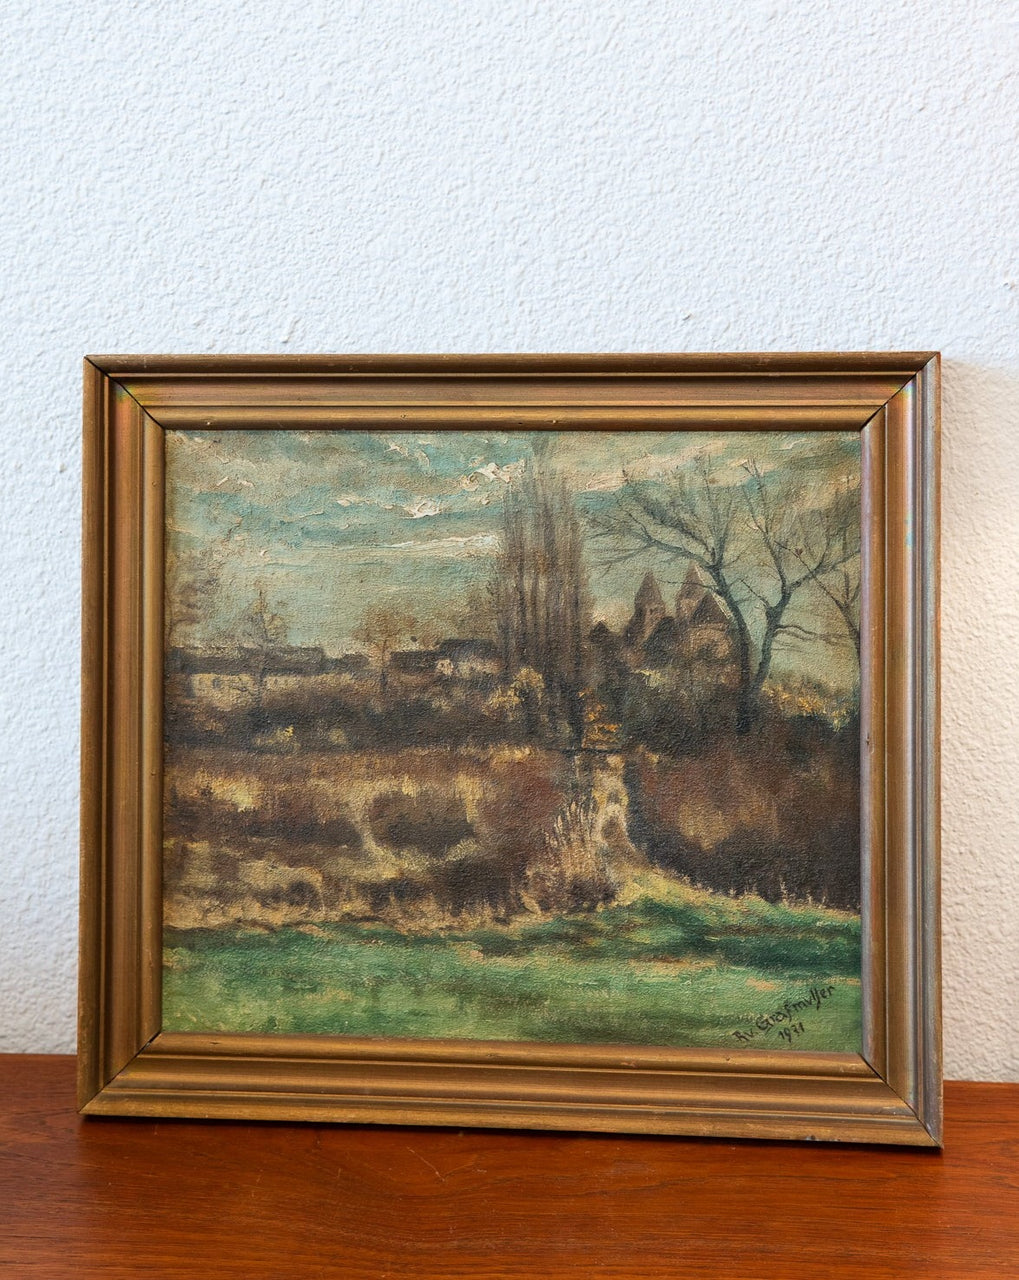 Countryside Landscape Vintage Painting